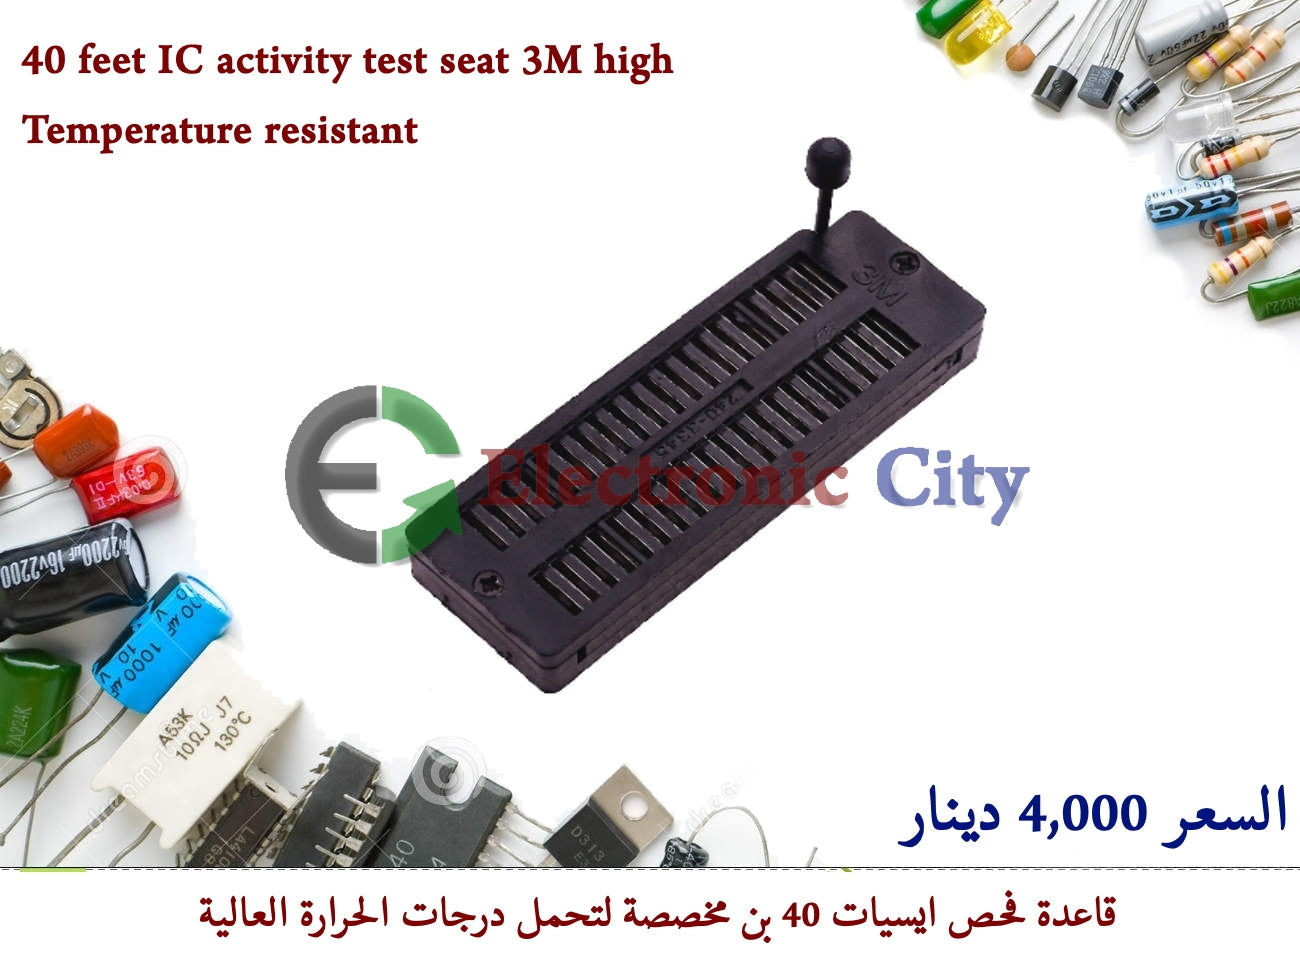 40 feet IC activity test seat 3M high temperature resistant